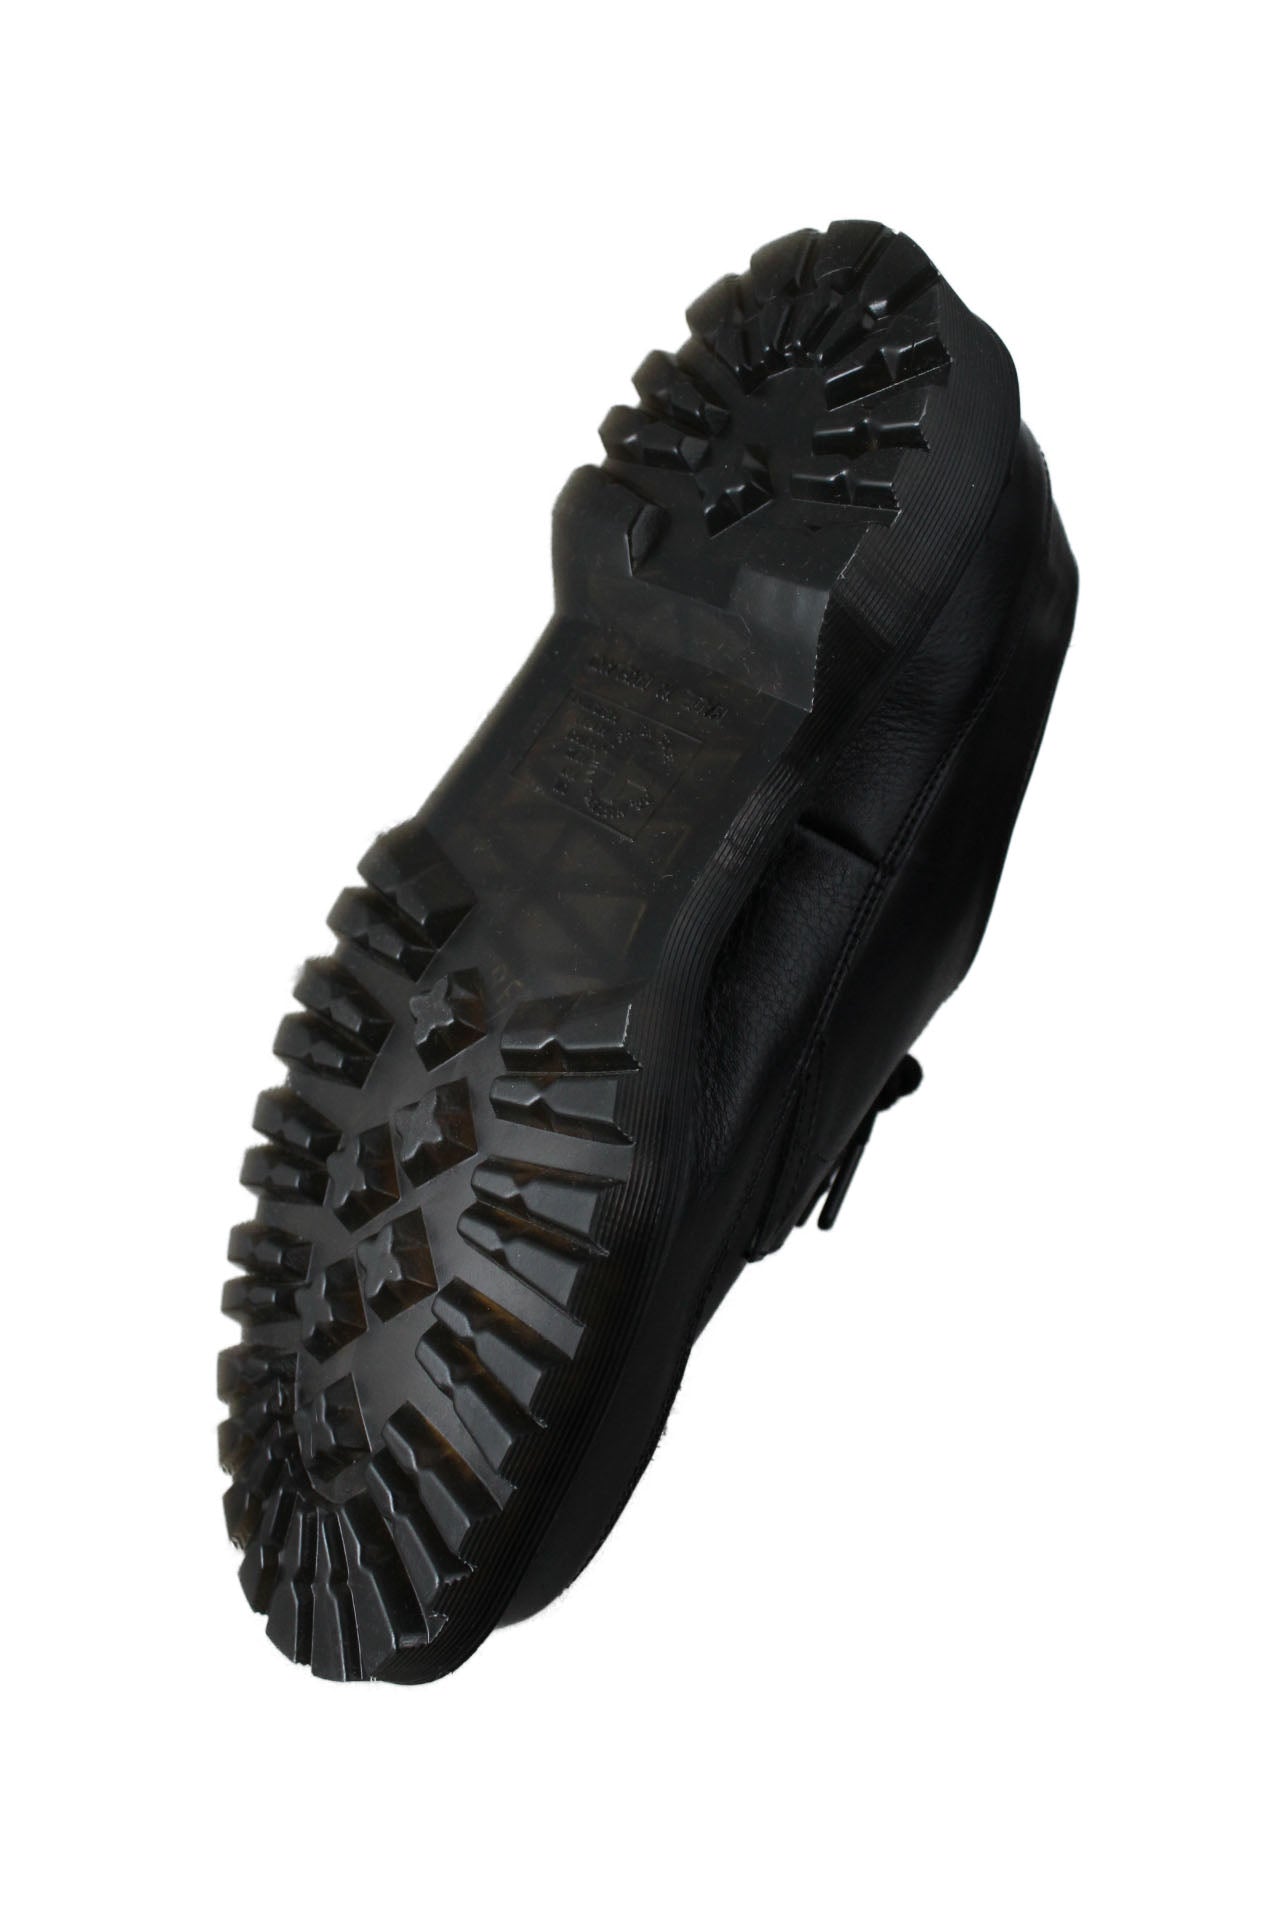 underside view with tread of soles.